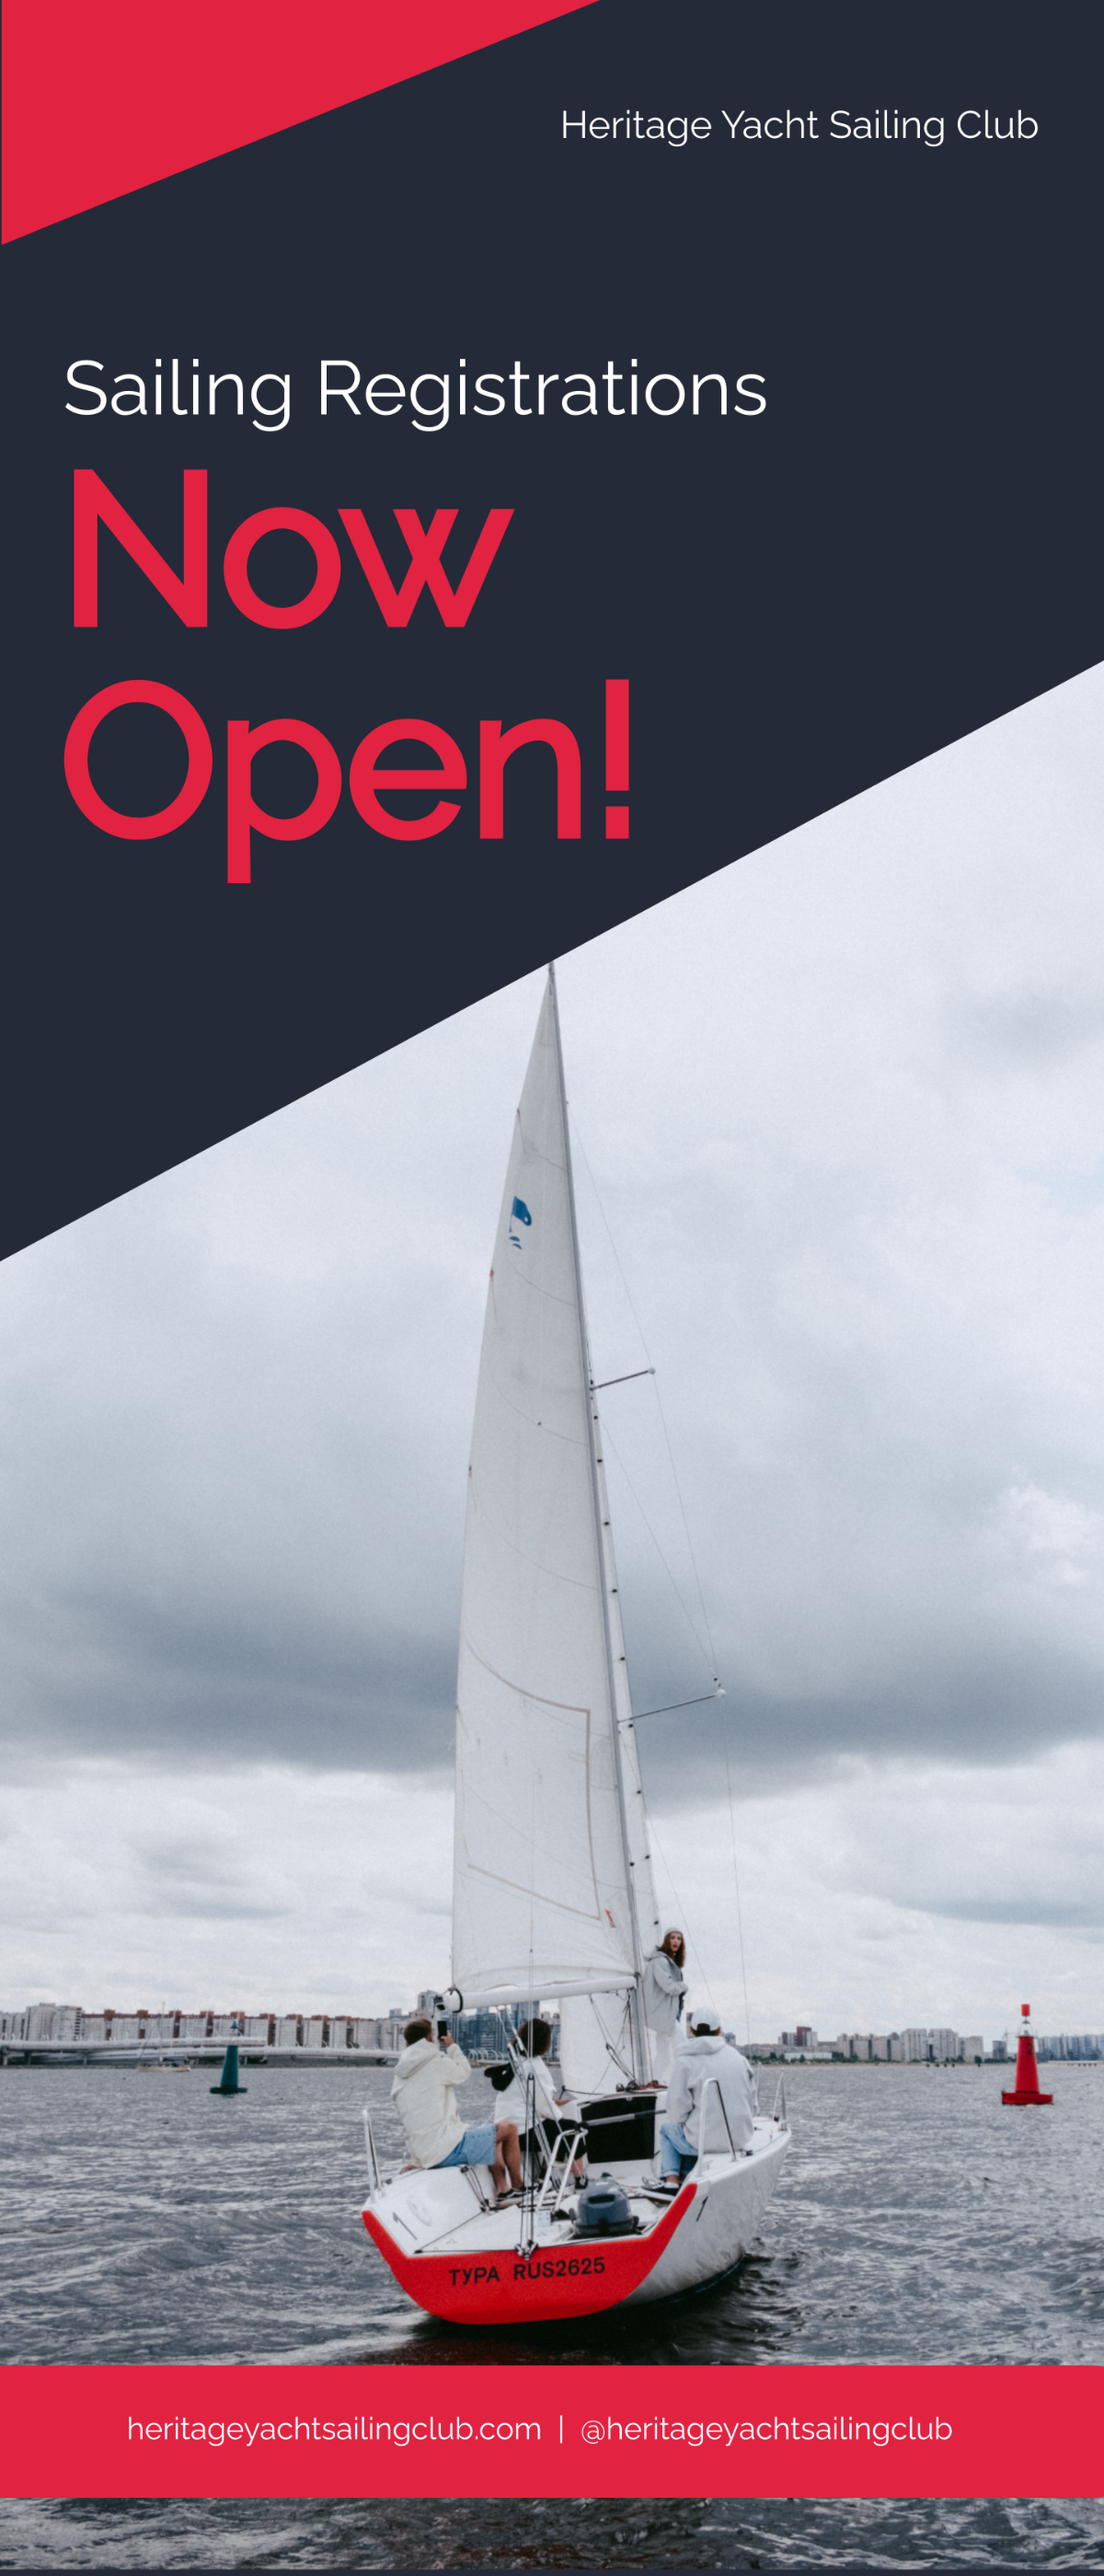 Yacht Sailing Club Rollup Banner Template